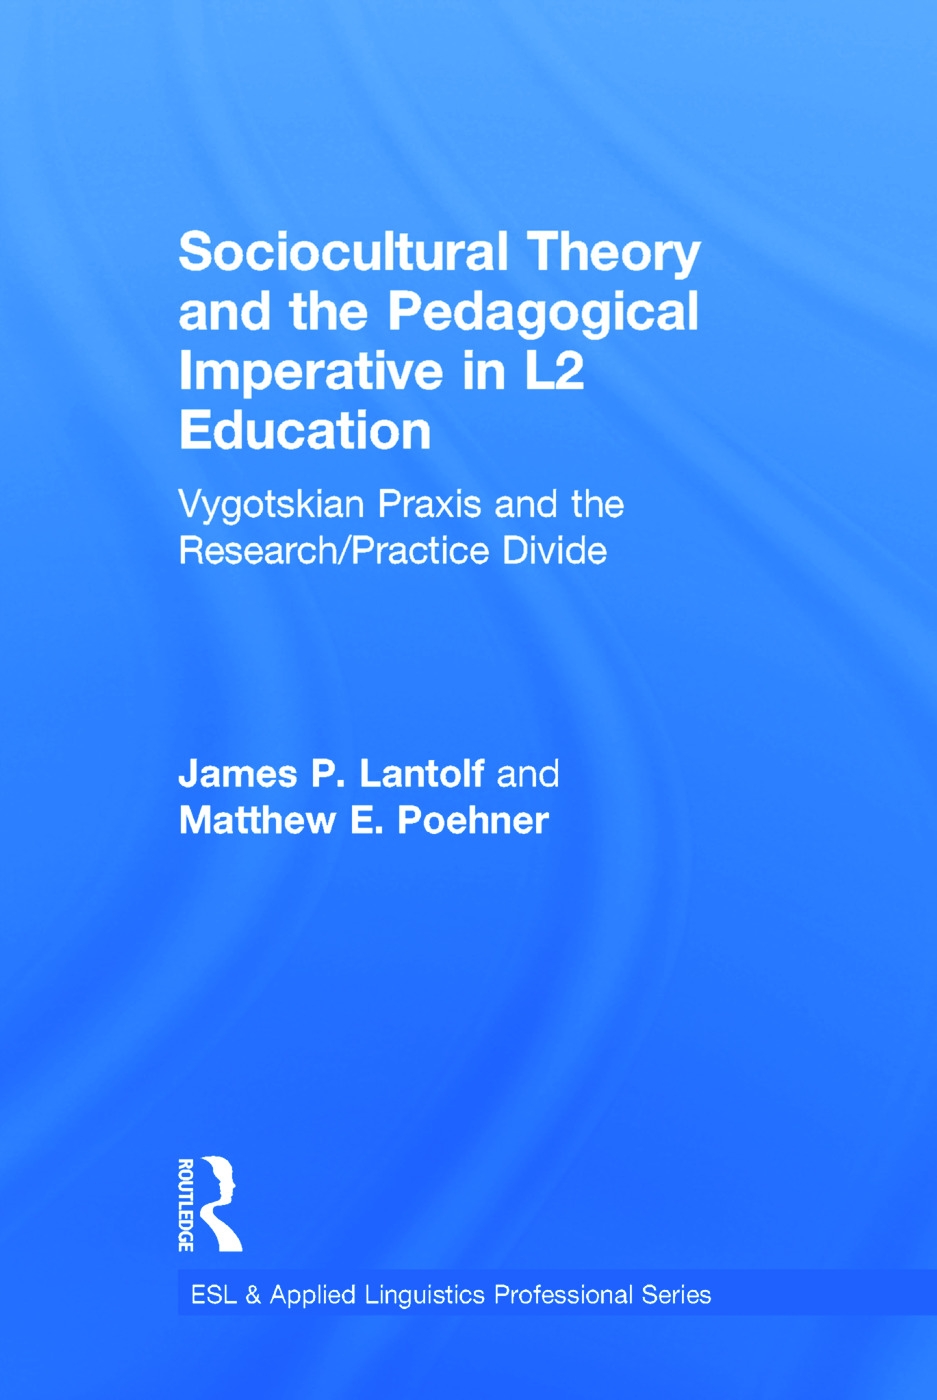 Sociocultural Theory and the Pedagogical Imperative in L2 Education: Vygotskian Praxis and the Research/Practice Divide